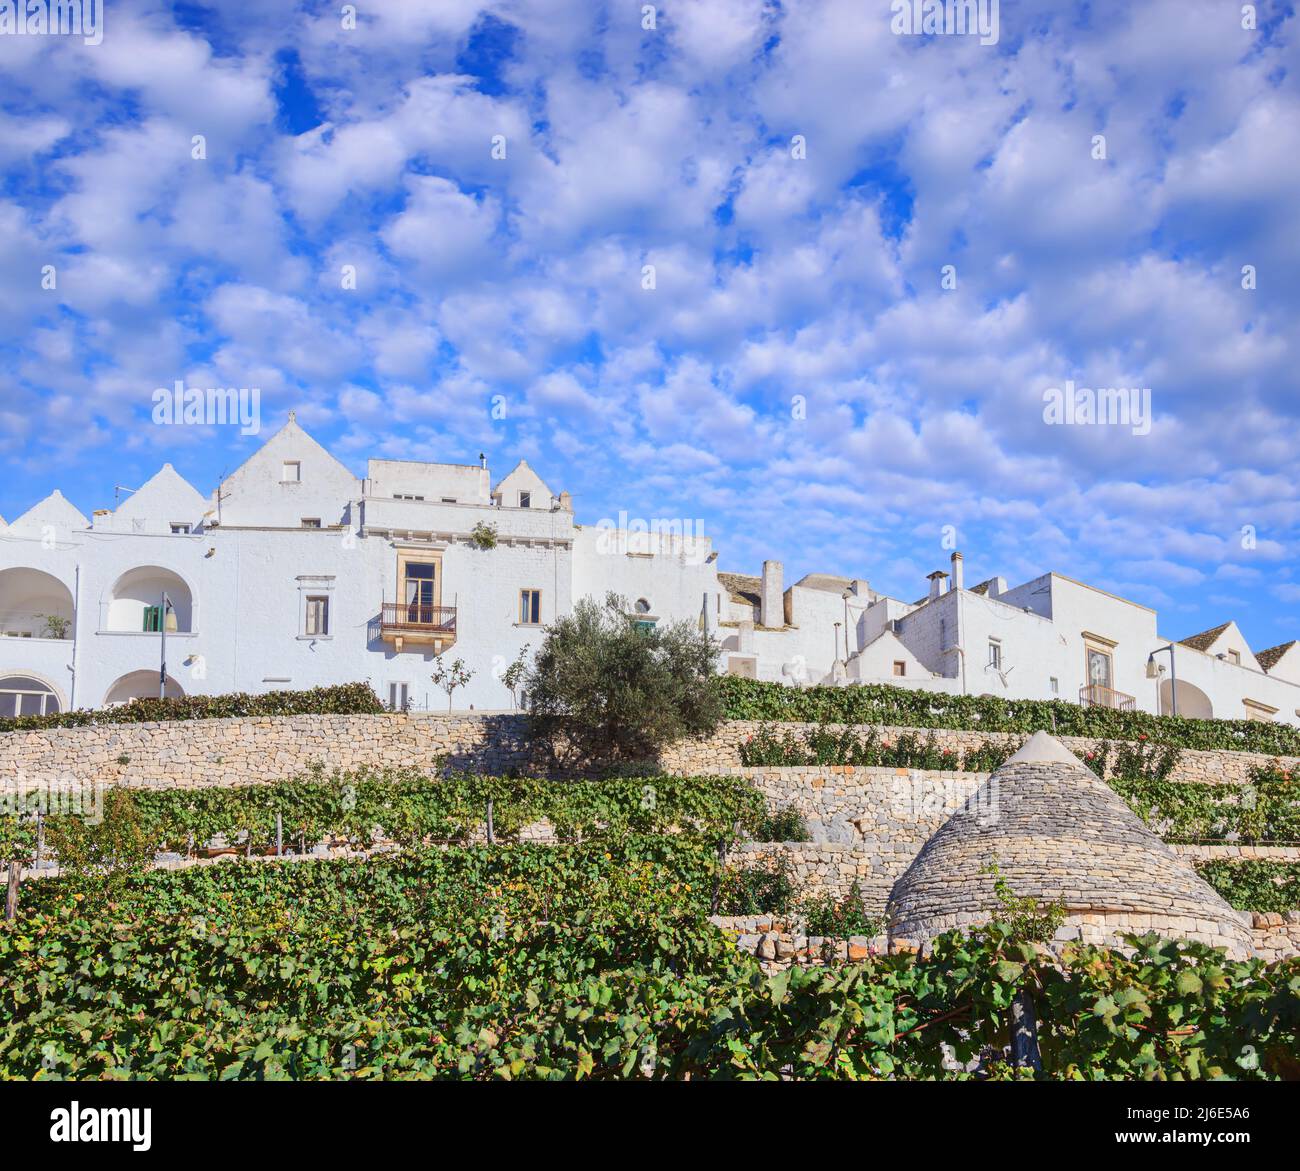 The most beautiful old towns in Italy: Locorotondo, laid on the top of a hill, has one of the most suggestive skylines of Apulia. Stock Photo